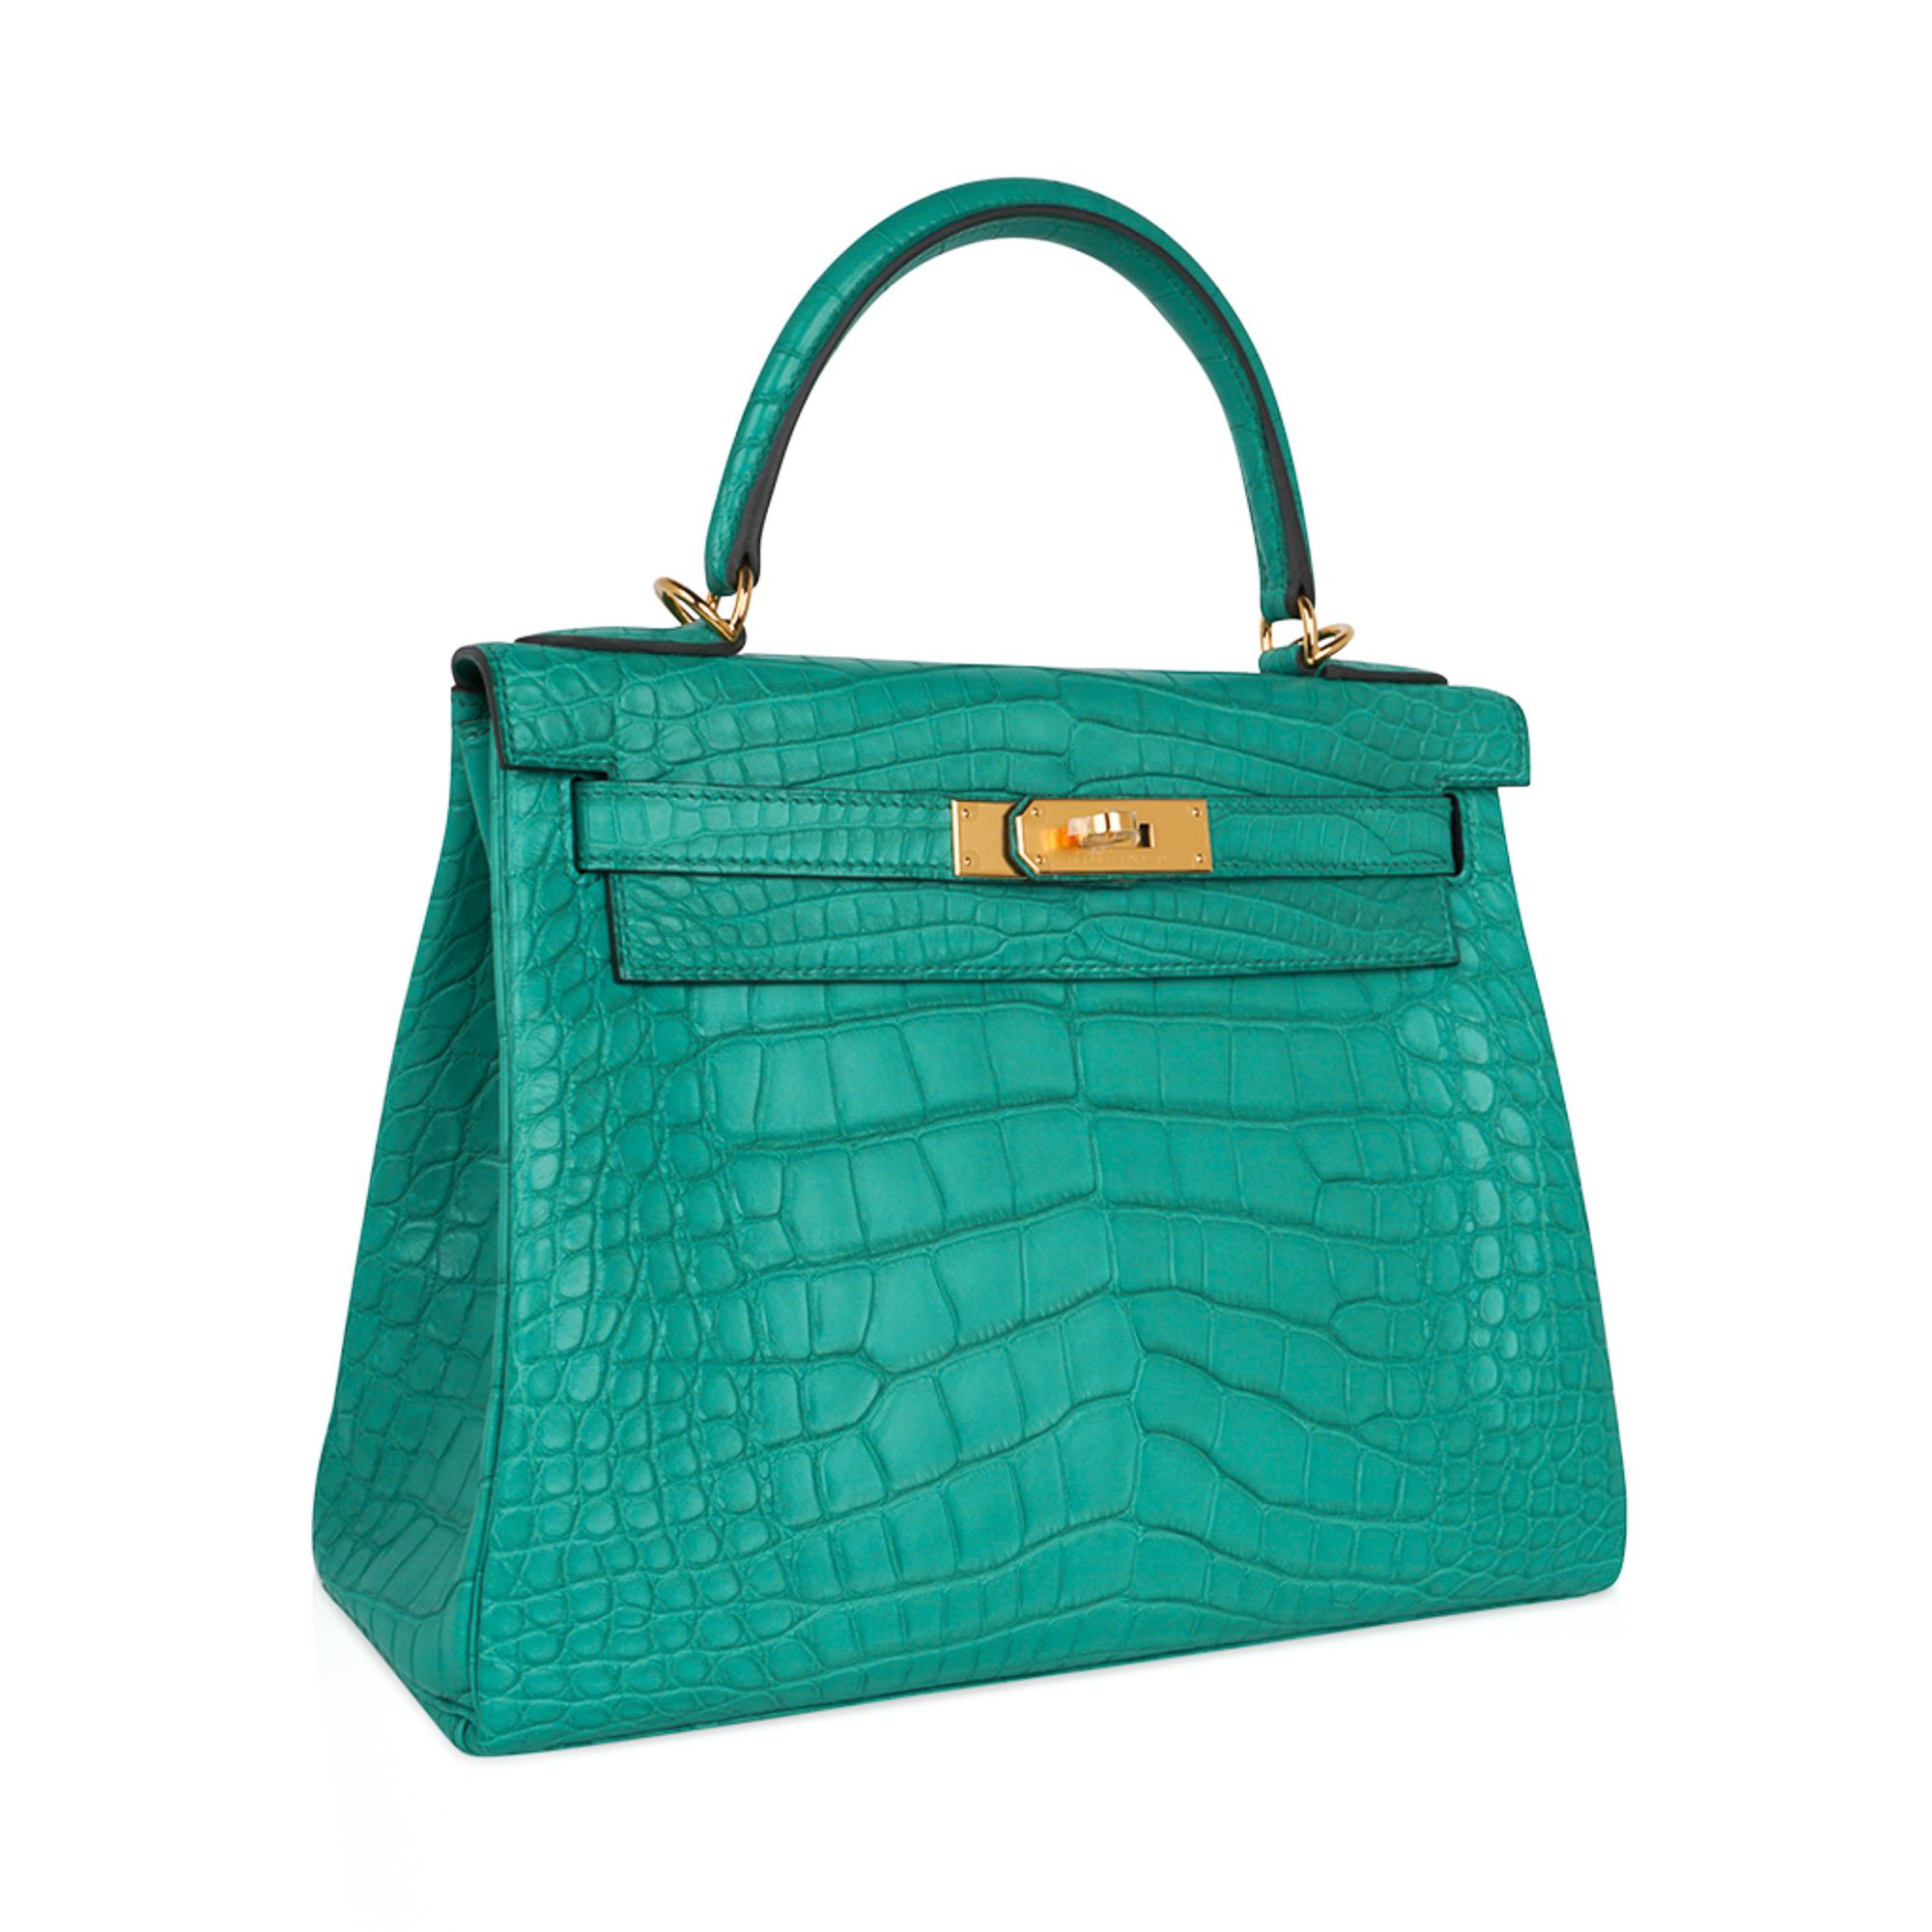 Mightychic offers an Hermes Kelly 28 bag featured in stunning Vert Jade matte alligator.
This exquisite Hermes bag is simply one of the beautiful colours ever produced!
Accentuated with gold hardware.
This gorgeous Hermes Kelly bag is a perfect year